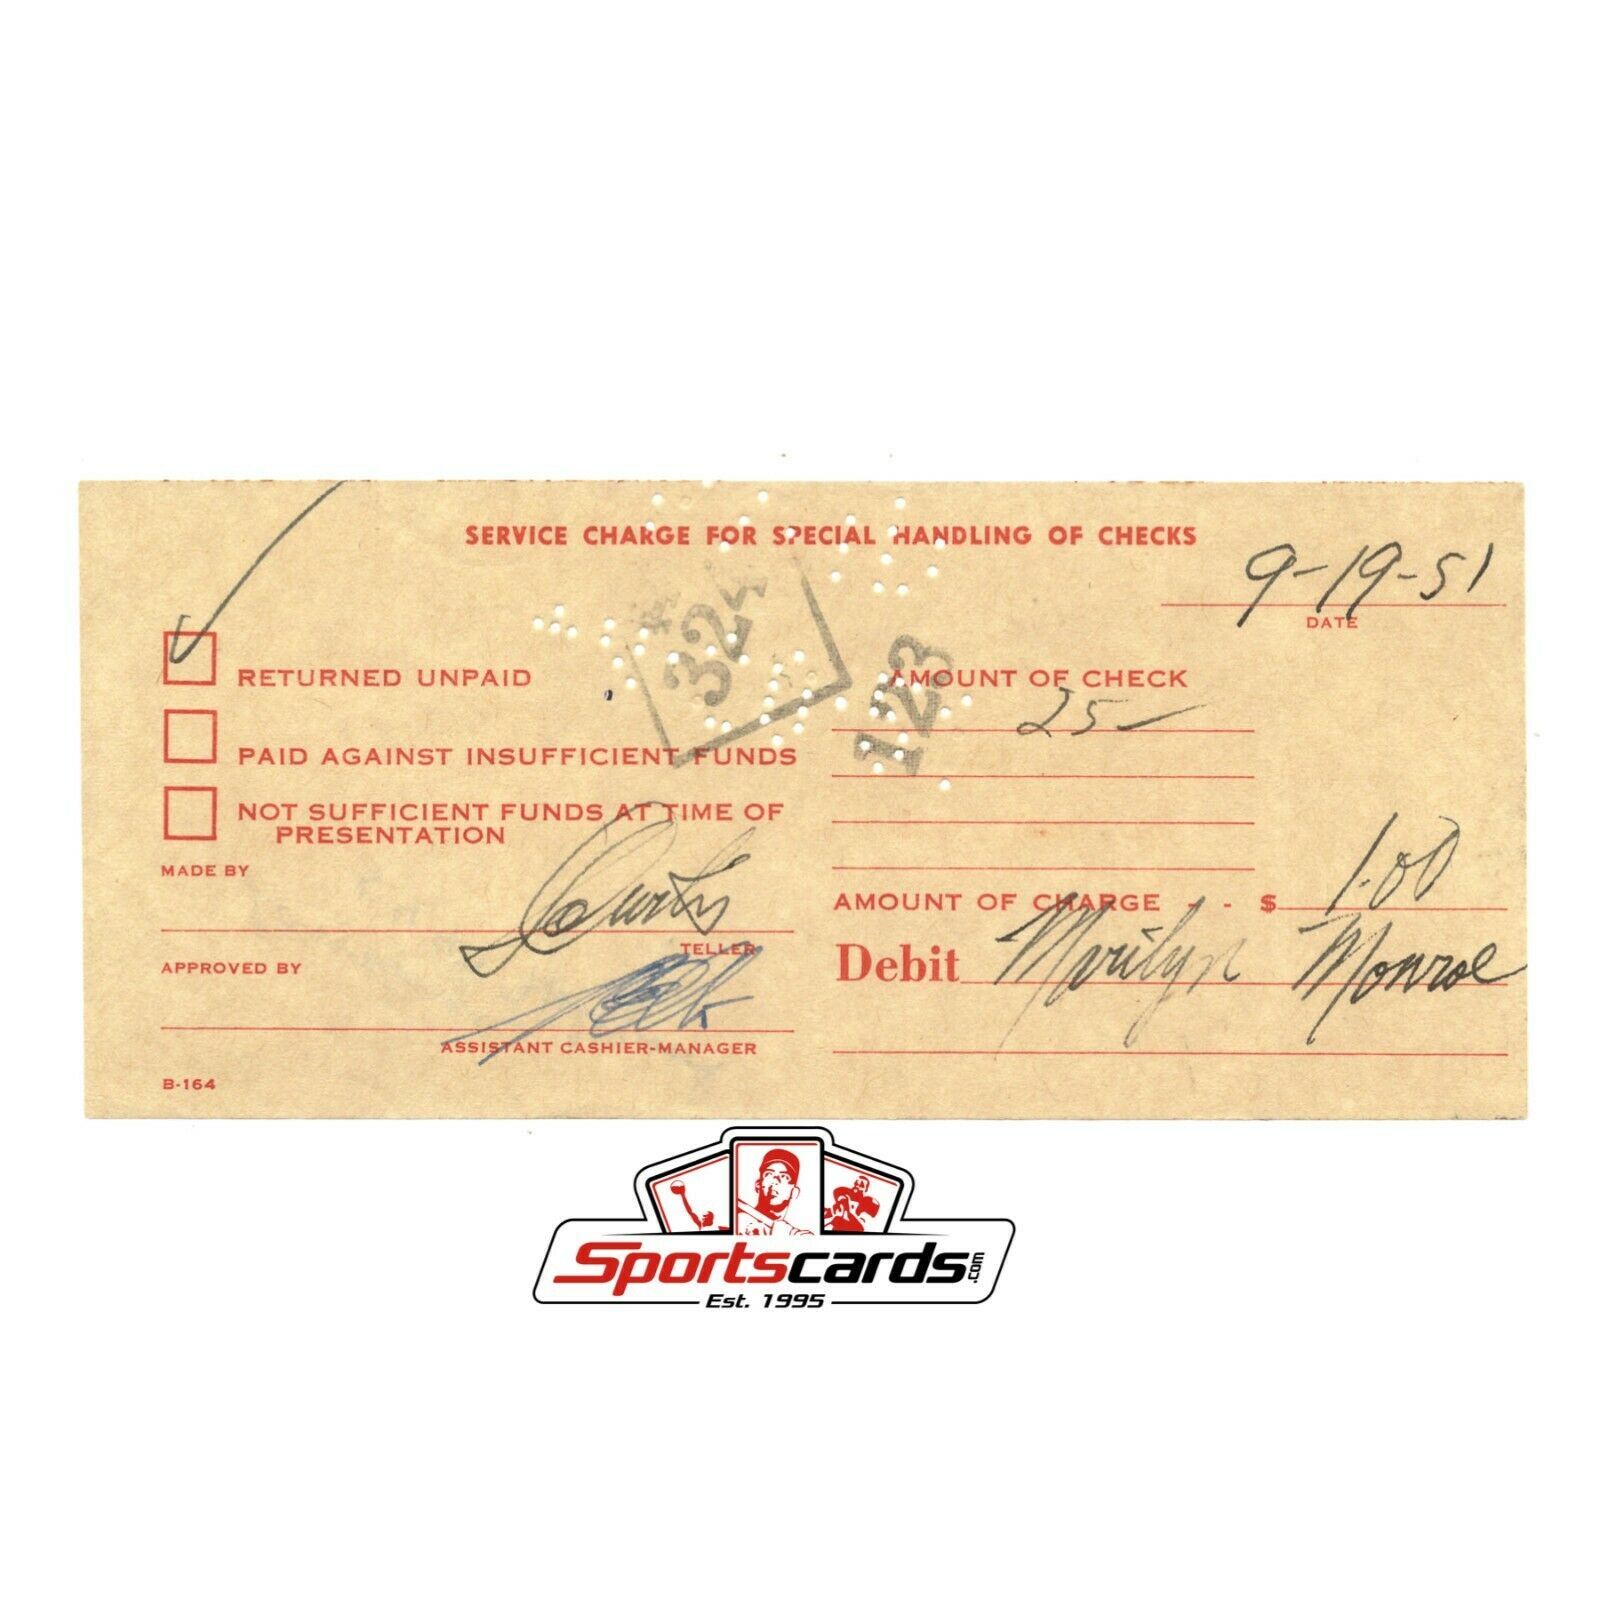 Marilyn Monroe Bank Issue Service Charge Receipt Dated 9-19-51